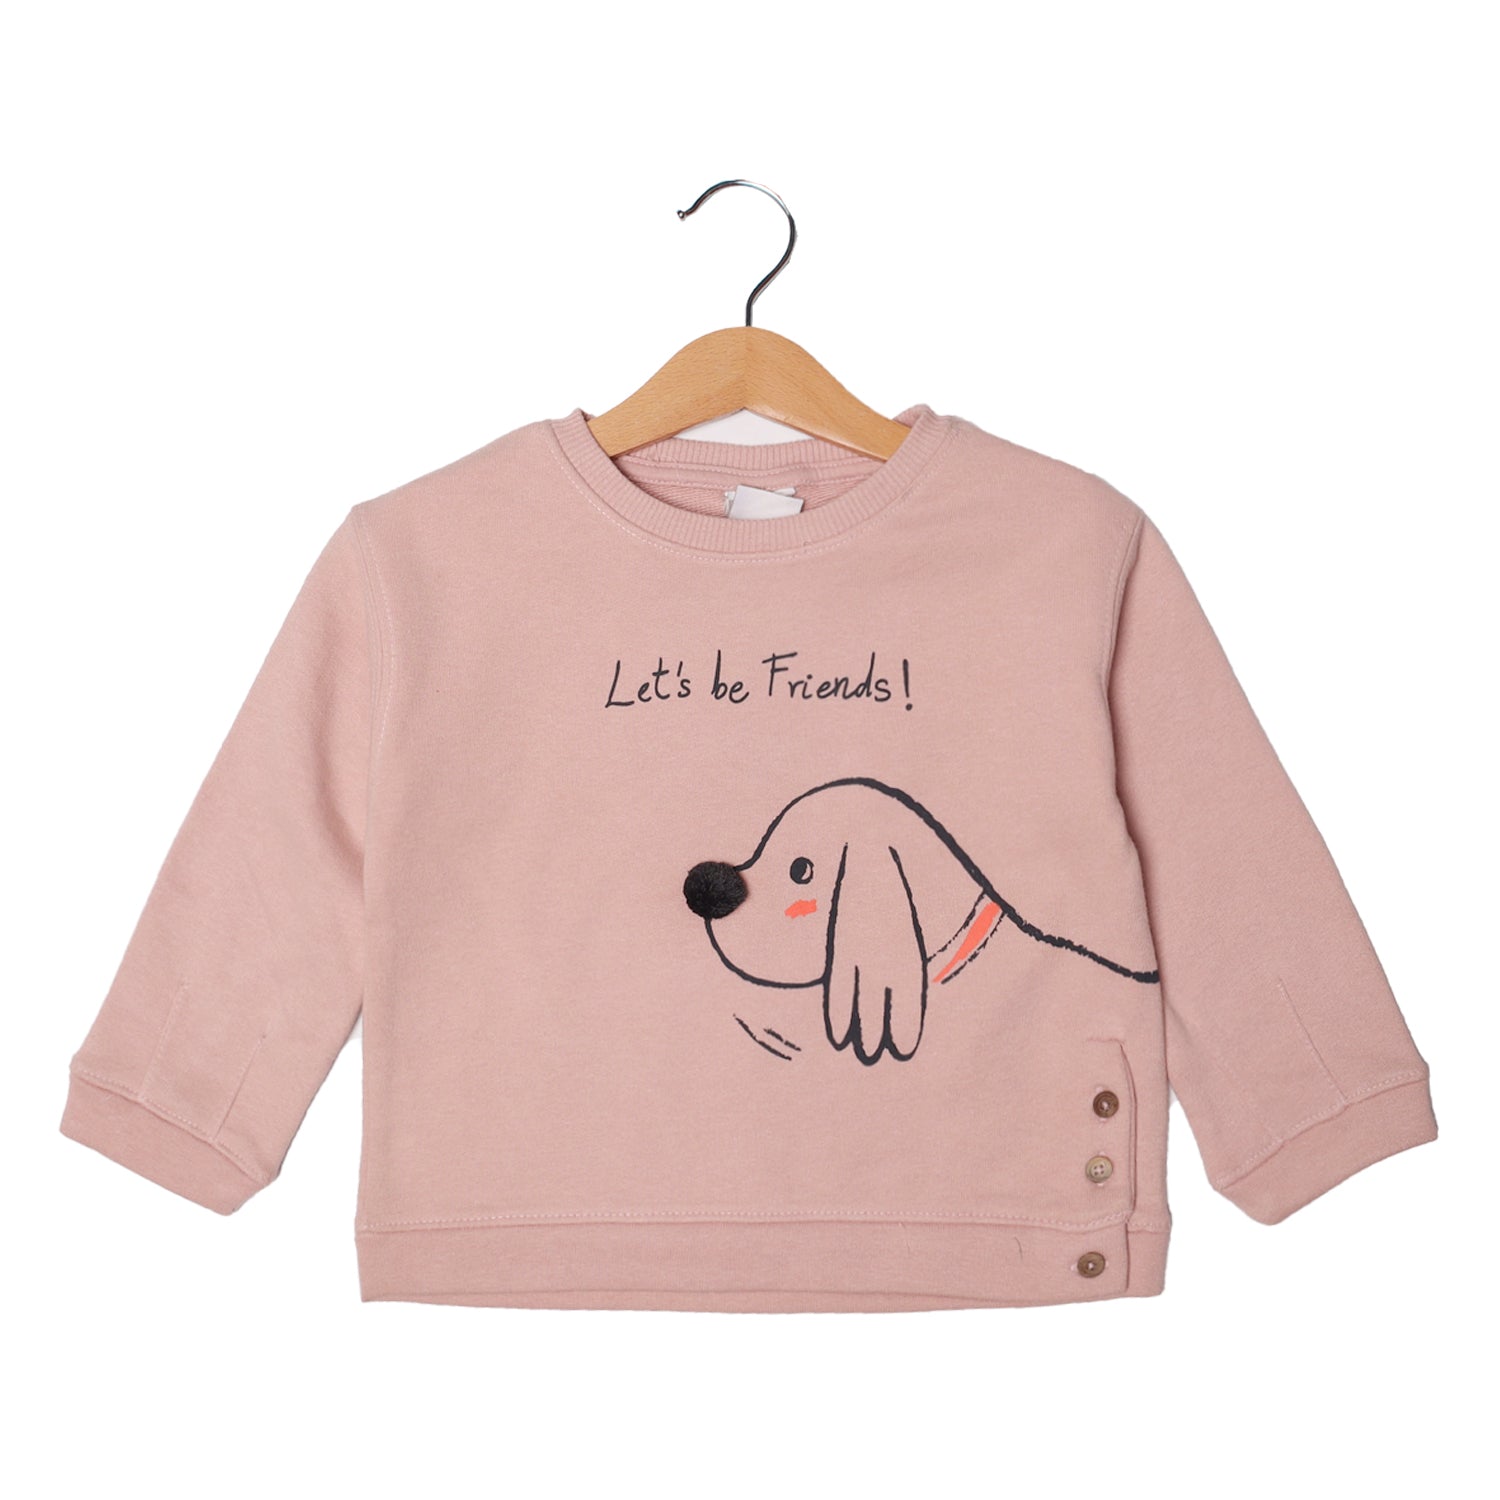 PINK LET'S BE FRIENDS PRINTED SWEATSHIRT FOR GIRLS